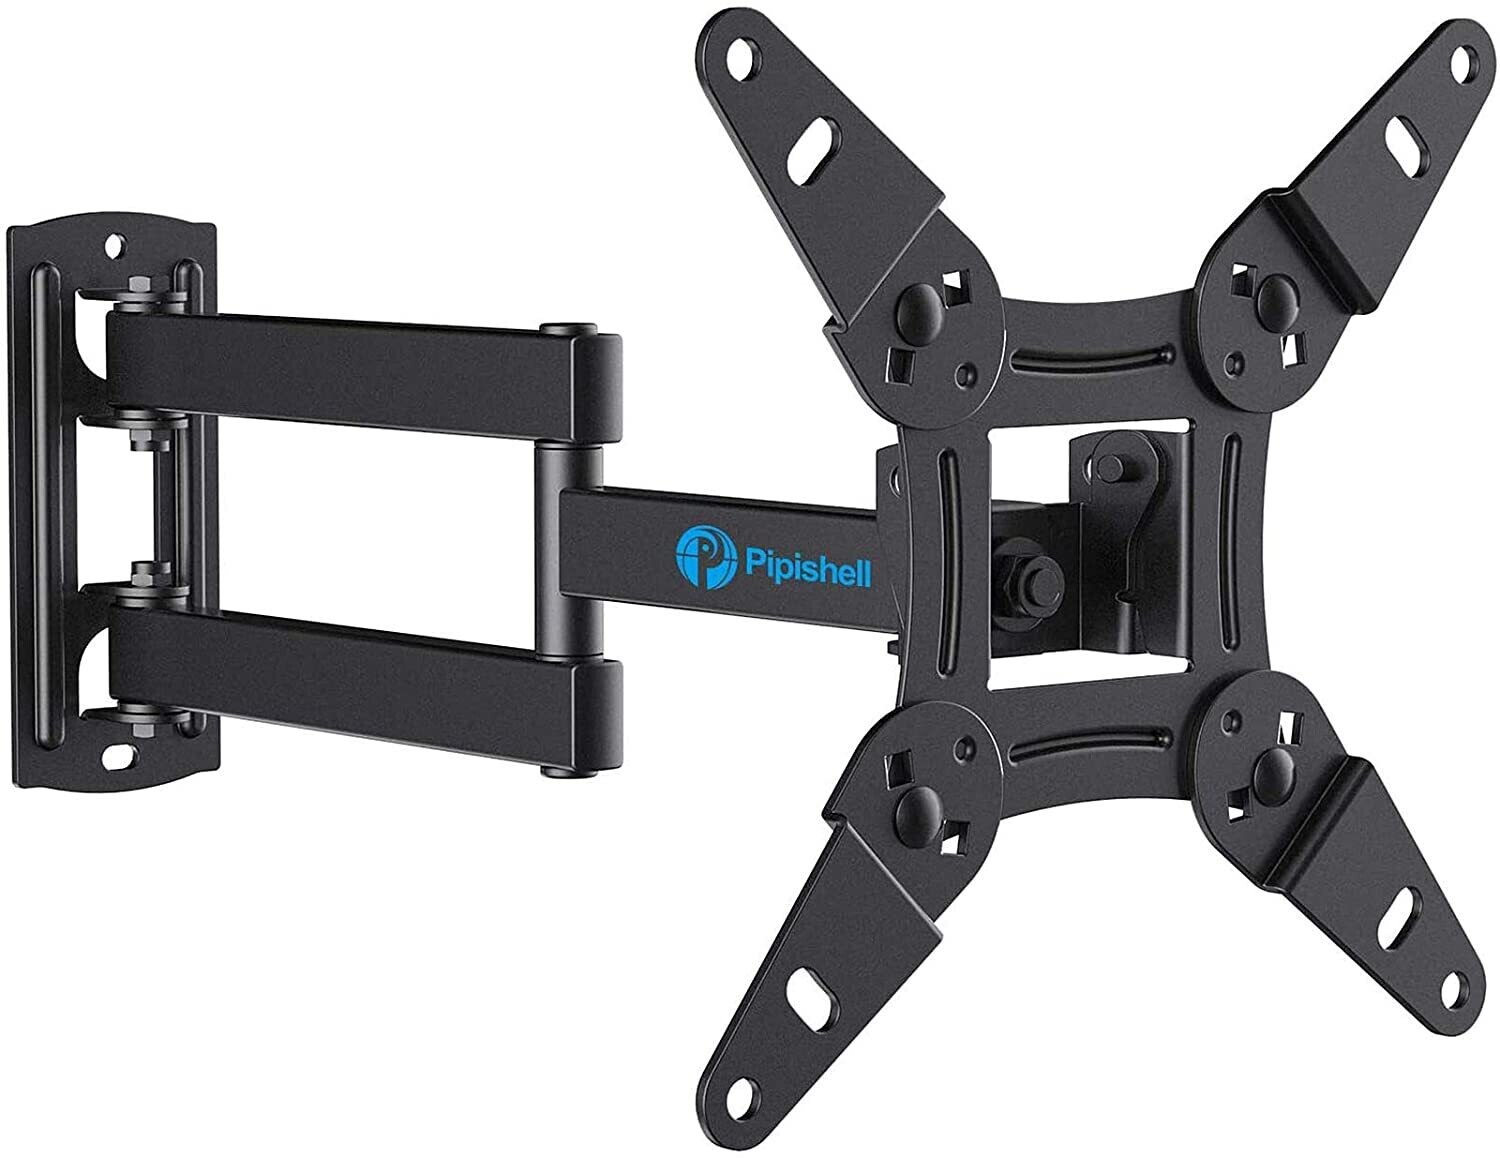 Full Motion TV Monitor Wall Mount Bracket Articulating Arms Swivels Tilts  Extension Rotation for Most 13-42 Inch LED LCD Flat Curved Screen TVs &  Monitors, Max VESA 200x200mm up to 44lbs by